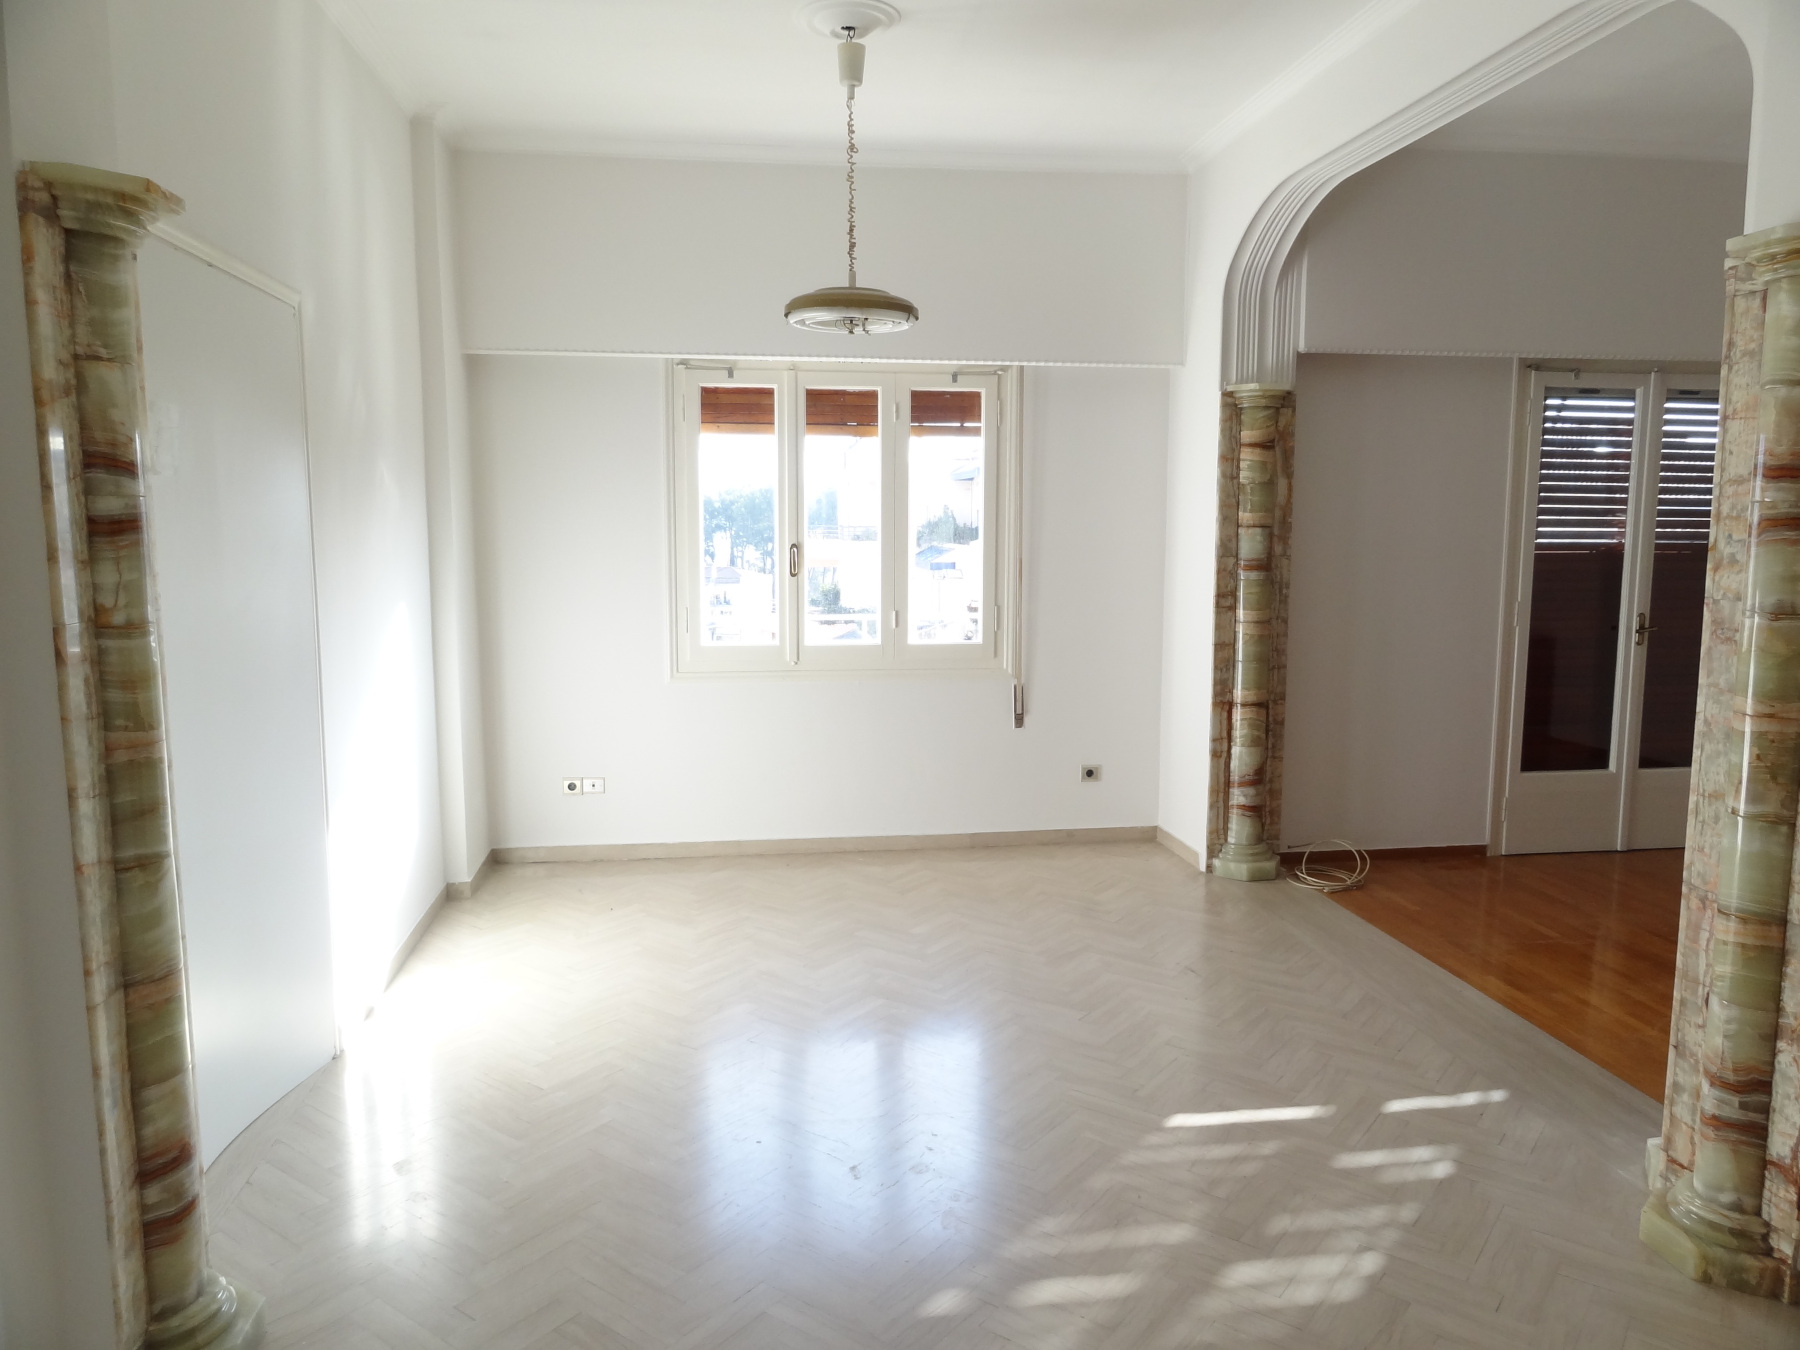 Spacious 105 sq.m. apartment for rent with 3 bedrooms on the 5th floor near the center of Ioannina